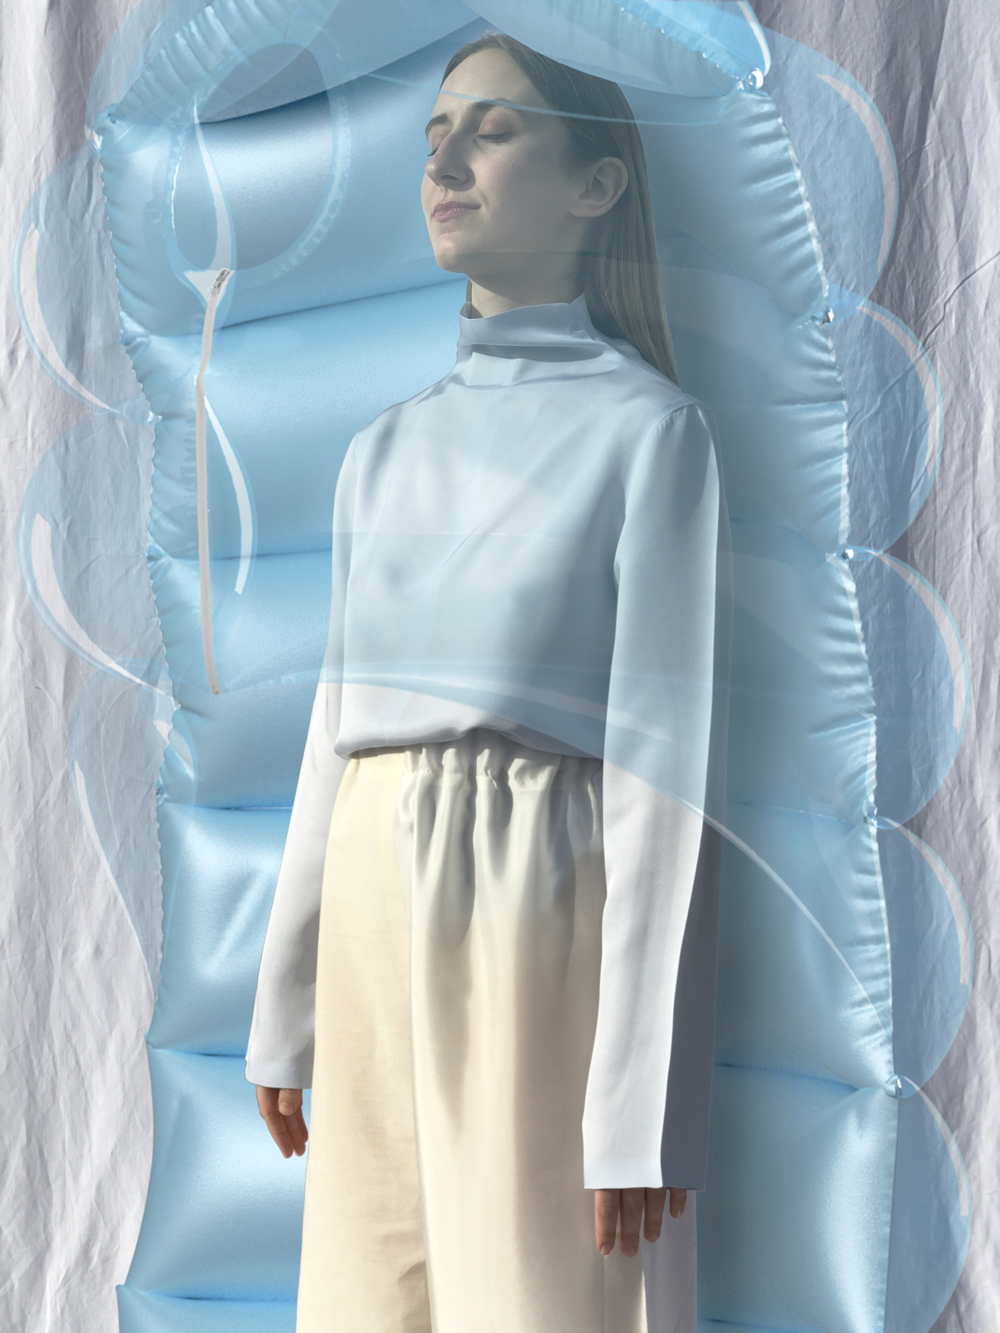 Diane walling, designer, fashion design, digital fashion, debut collection, debut digital collection, CARE OF SELF CARE OF WORLD, MA Fashion Futures, London College of Fashion, environment, well-being, material saving, 3D visualisation, DressX, phygitality, Clo 3D, mental resilience, virtual world